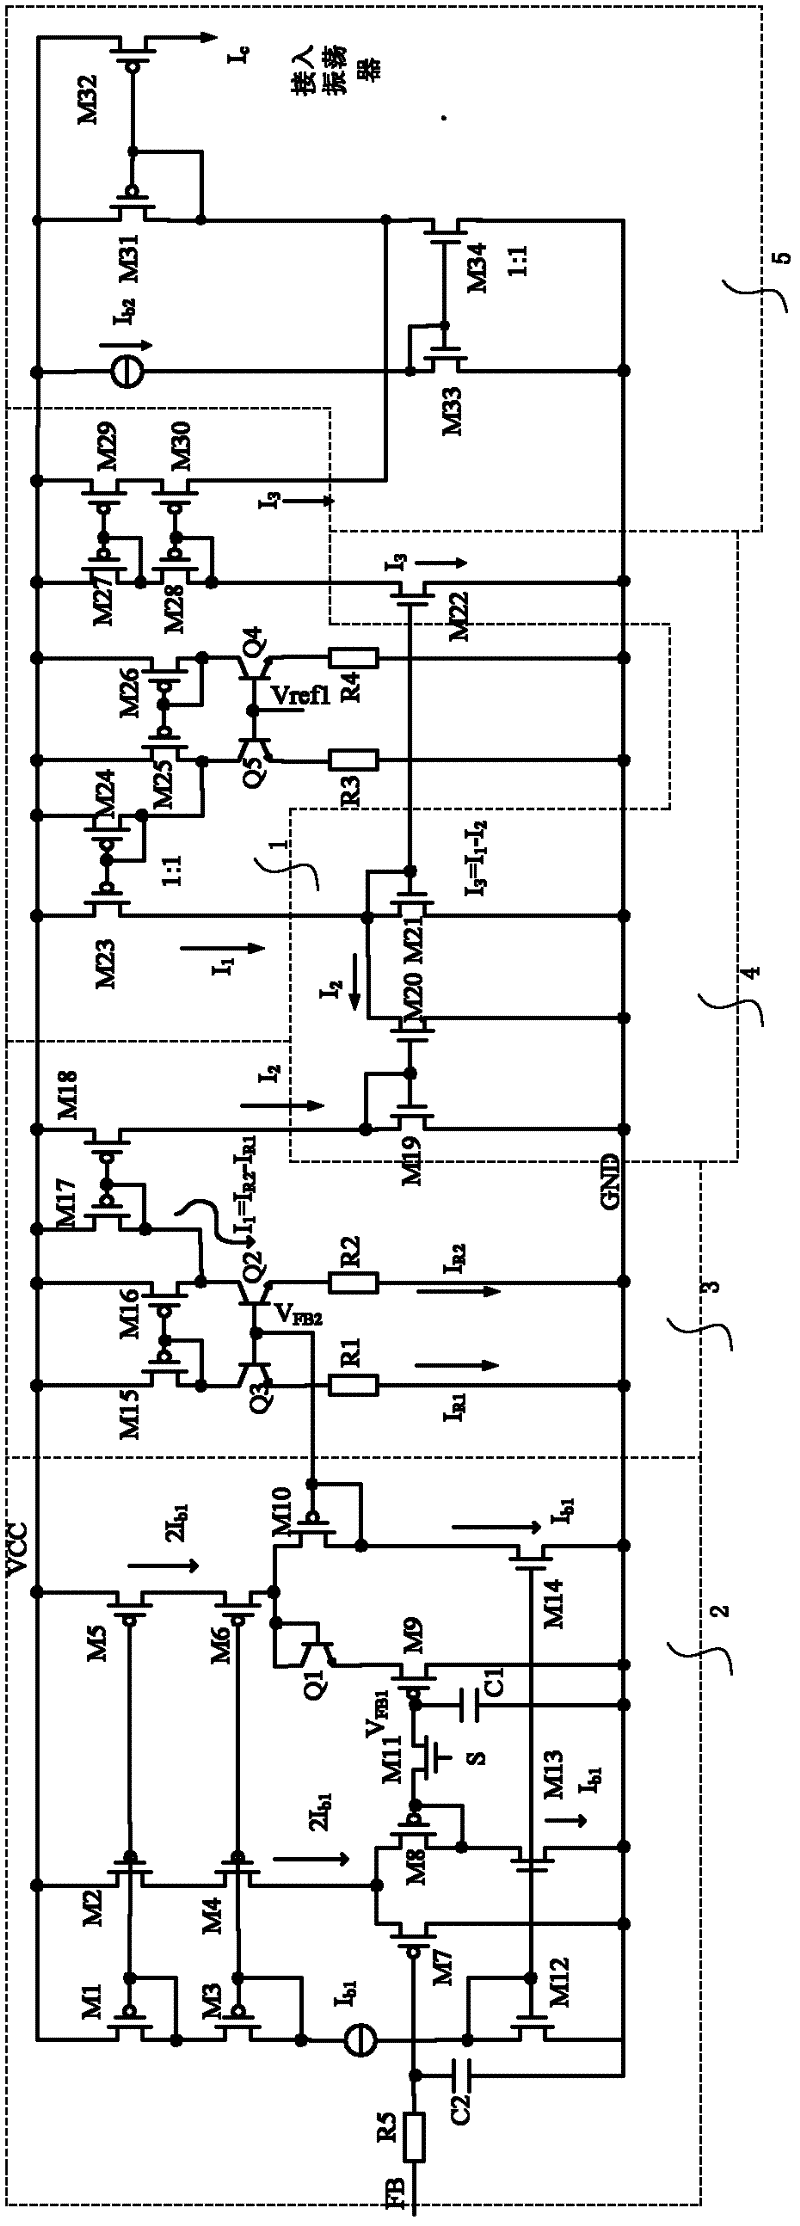 pfm constant current control circuit applied in ac-dc converter